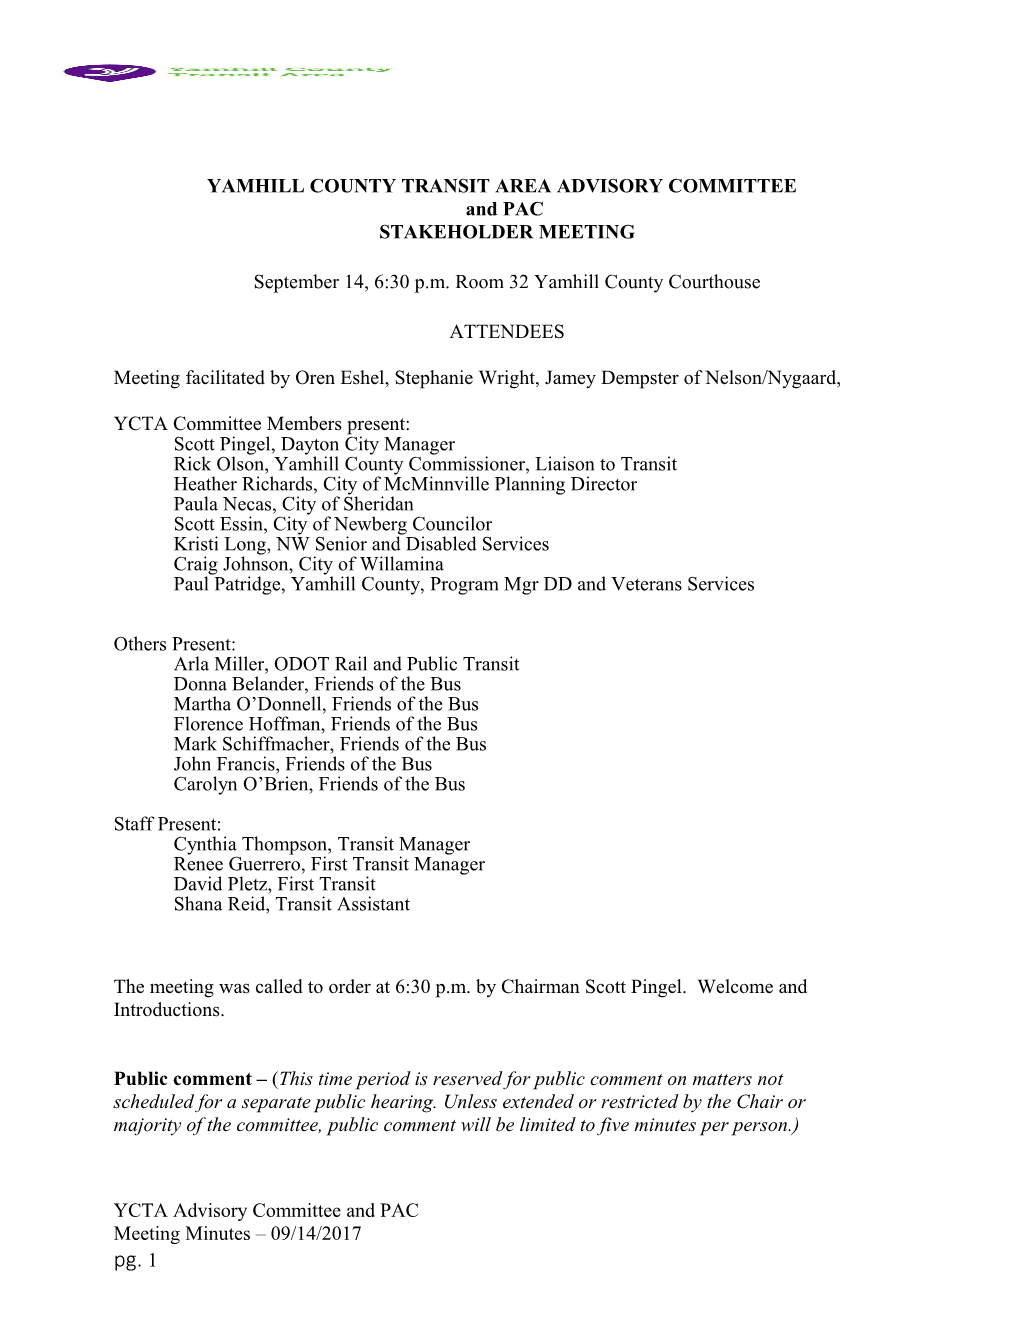 Yamhill County Transit Areaadvisory Committee